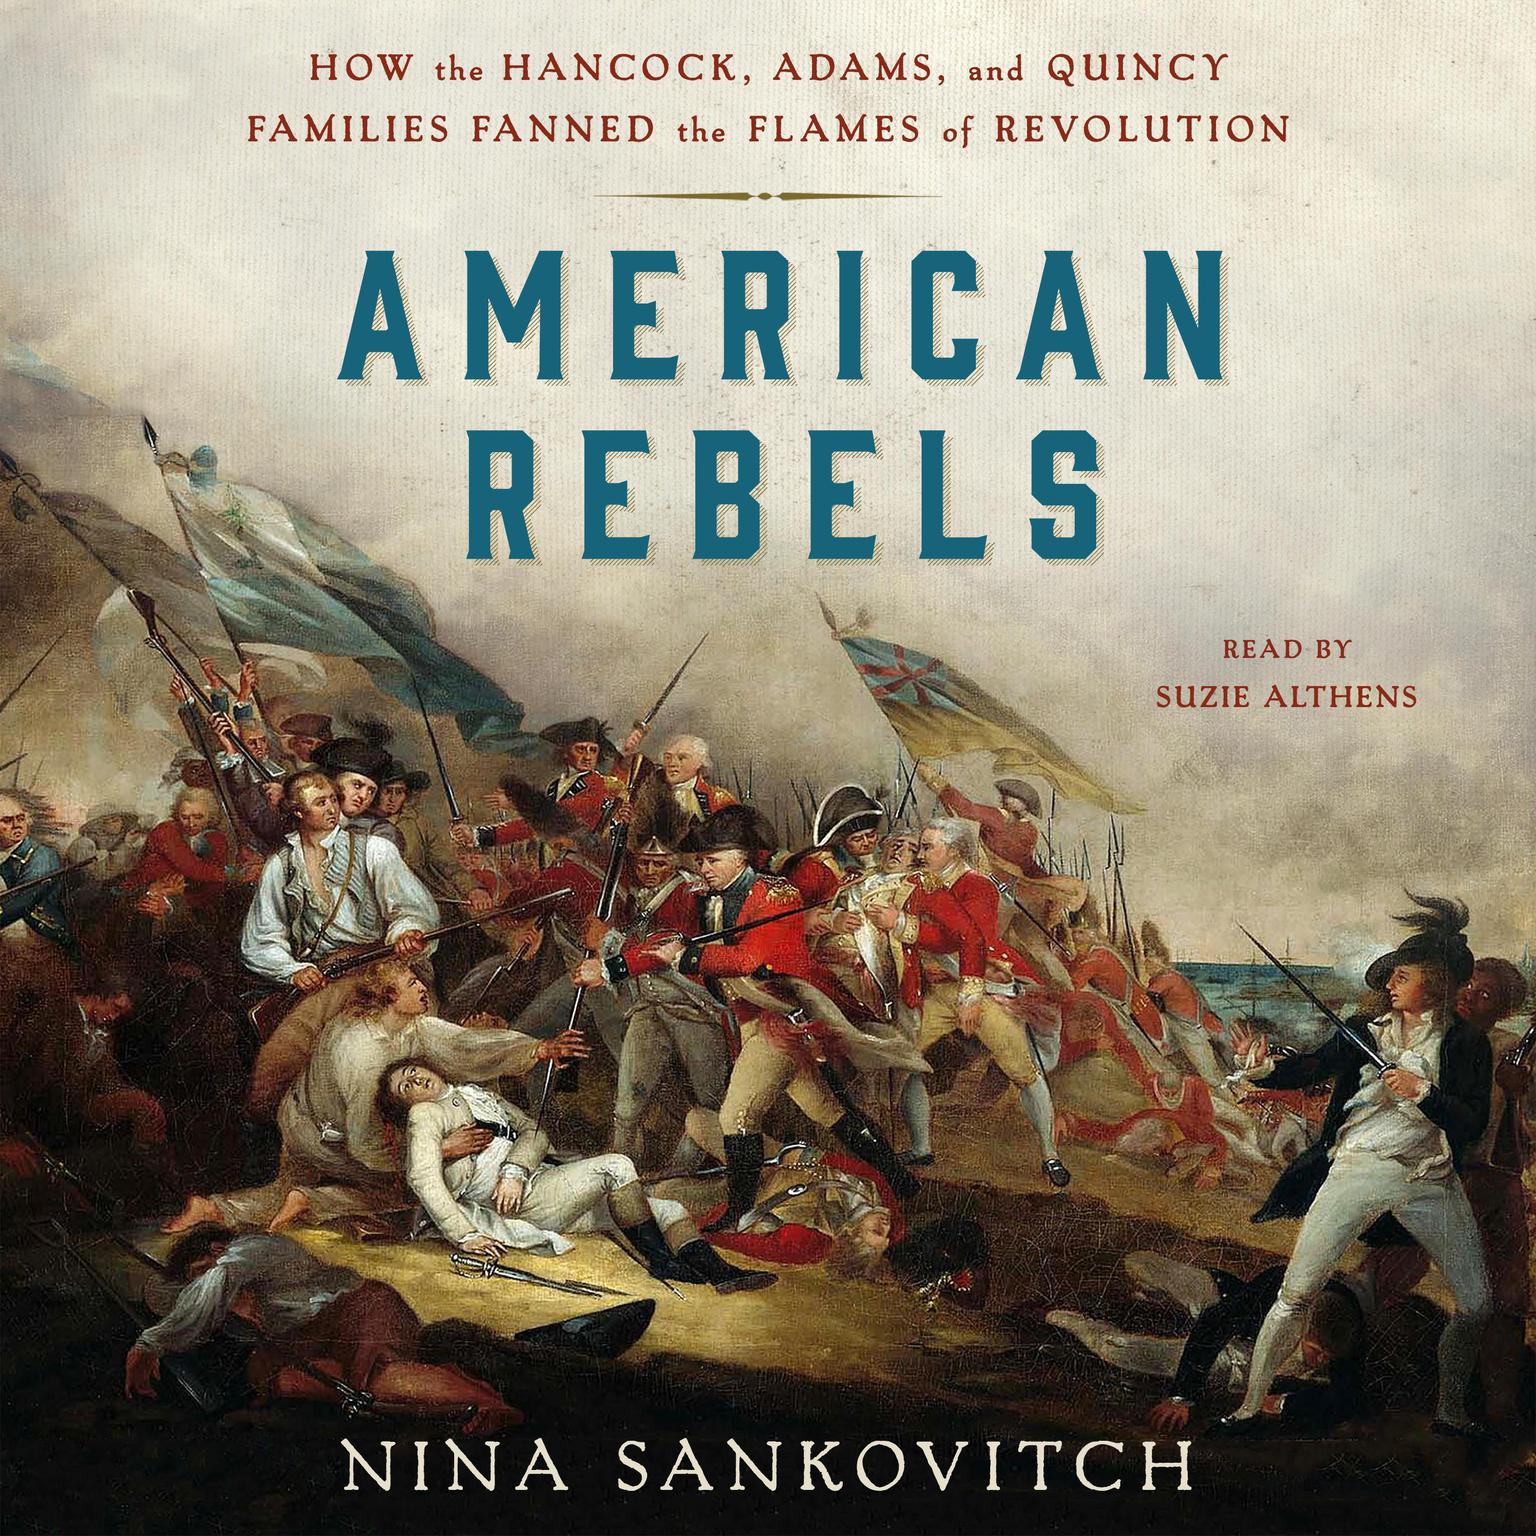 American Rebels: How the Hancock, Adams, and Quincy Families Fanned the Flames of Revolution Audiobook, by Nina Sankovitch